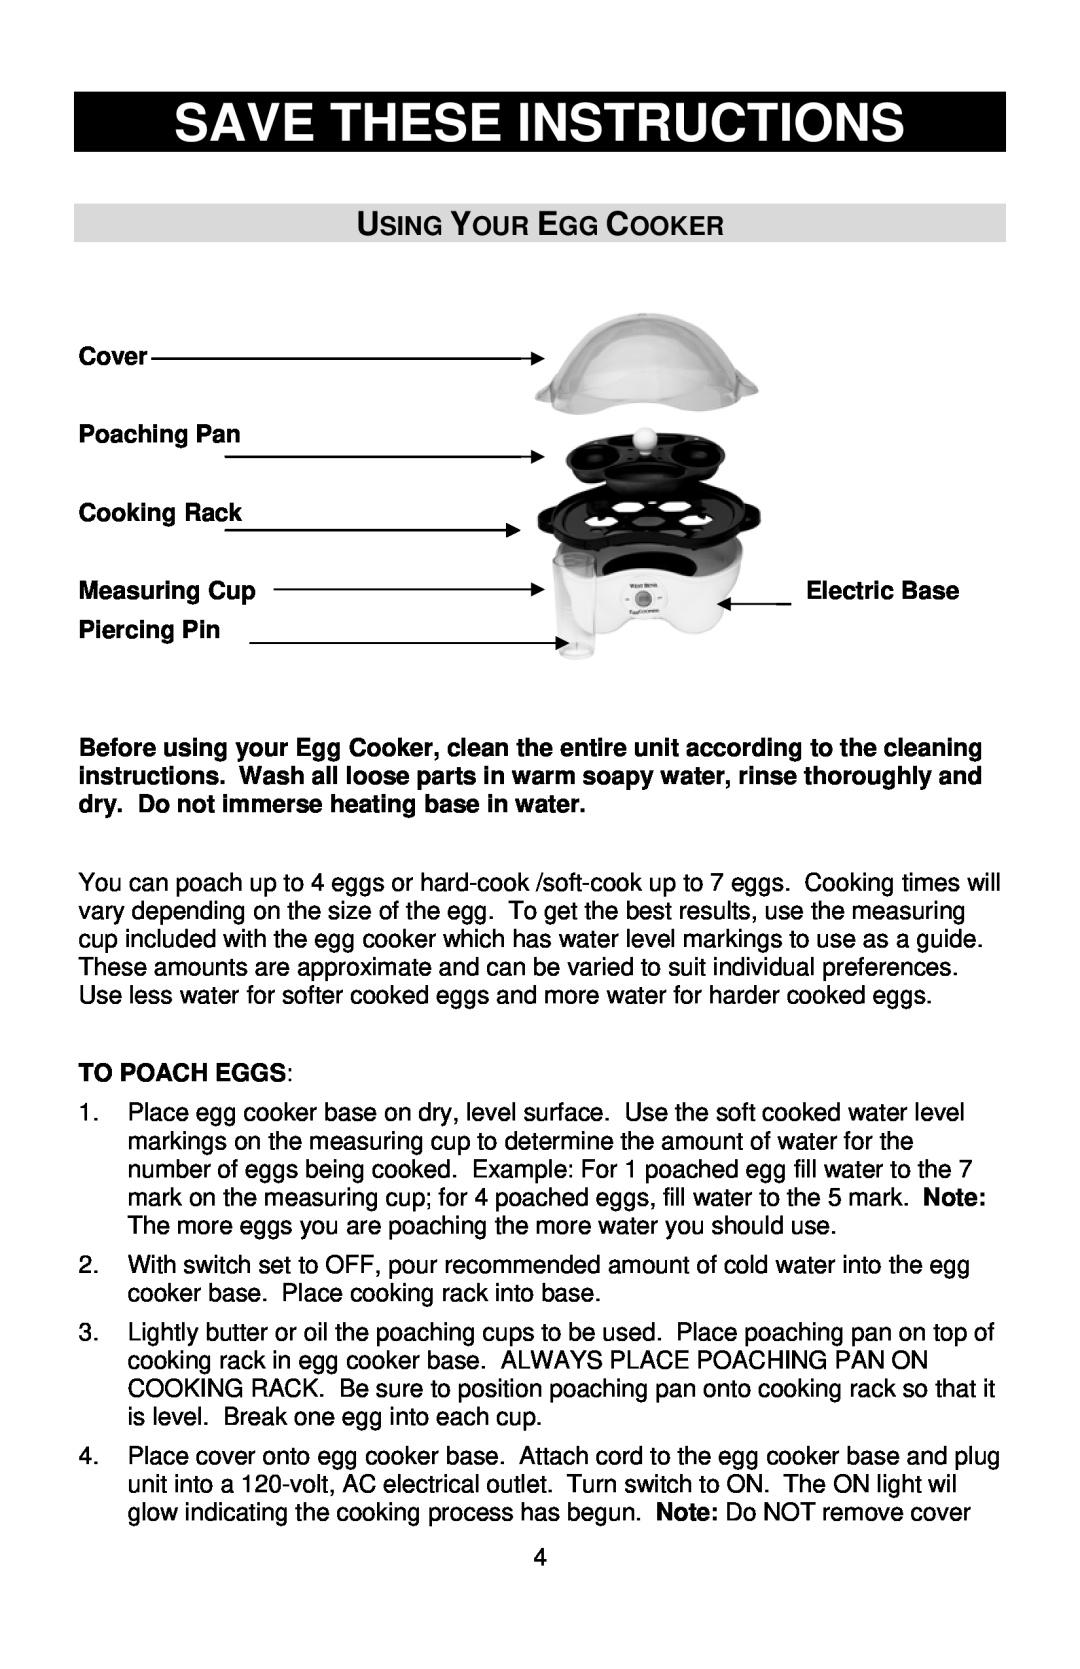 West Bend Automatic Egg Cooker Save These Instructions, Using Your Egg Cooker, Cover Poaching Pan Cooking Rack 